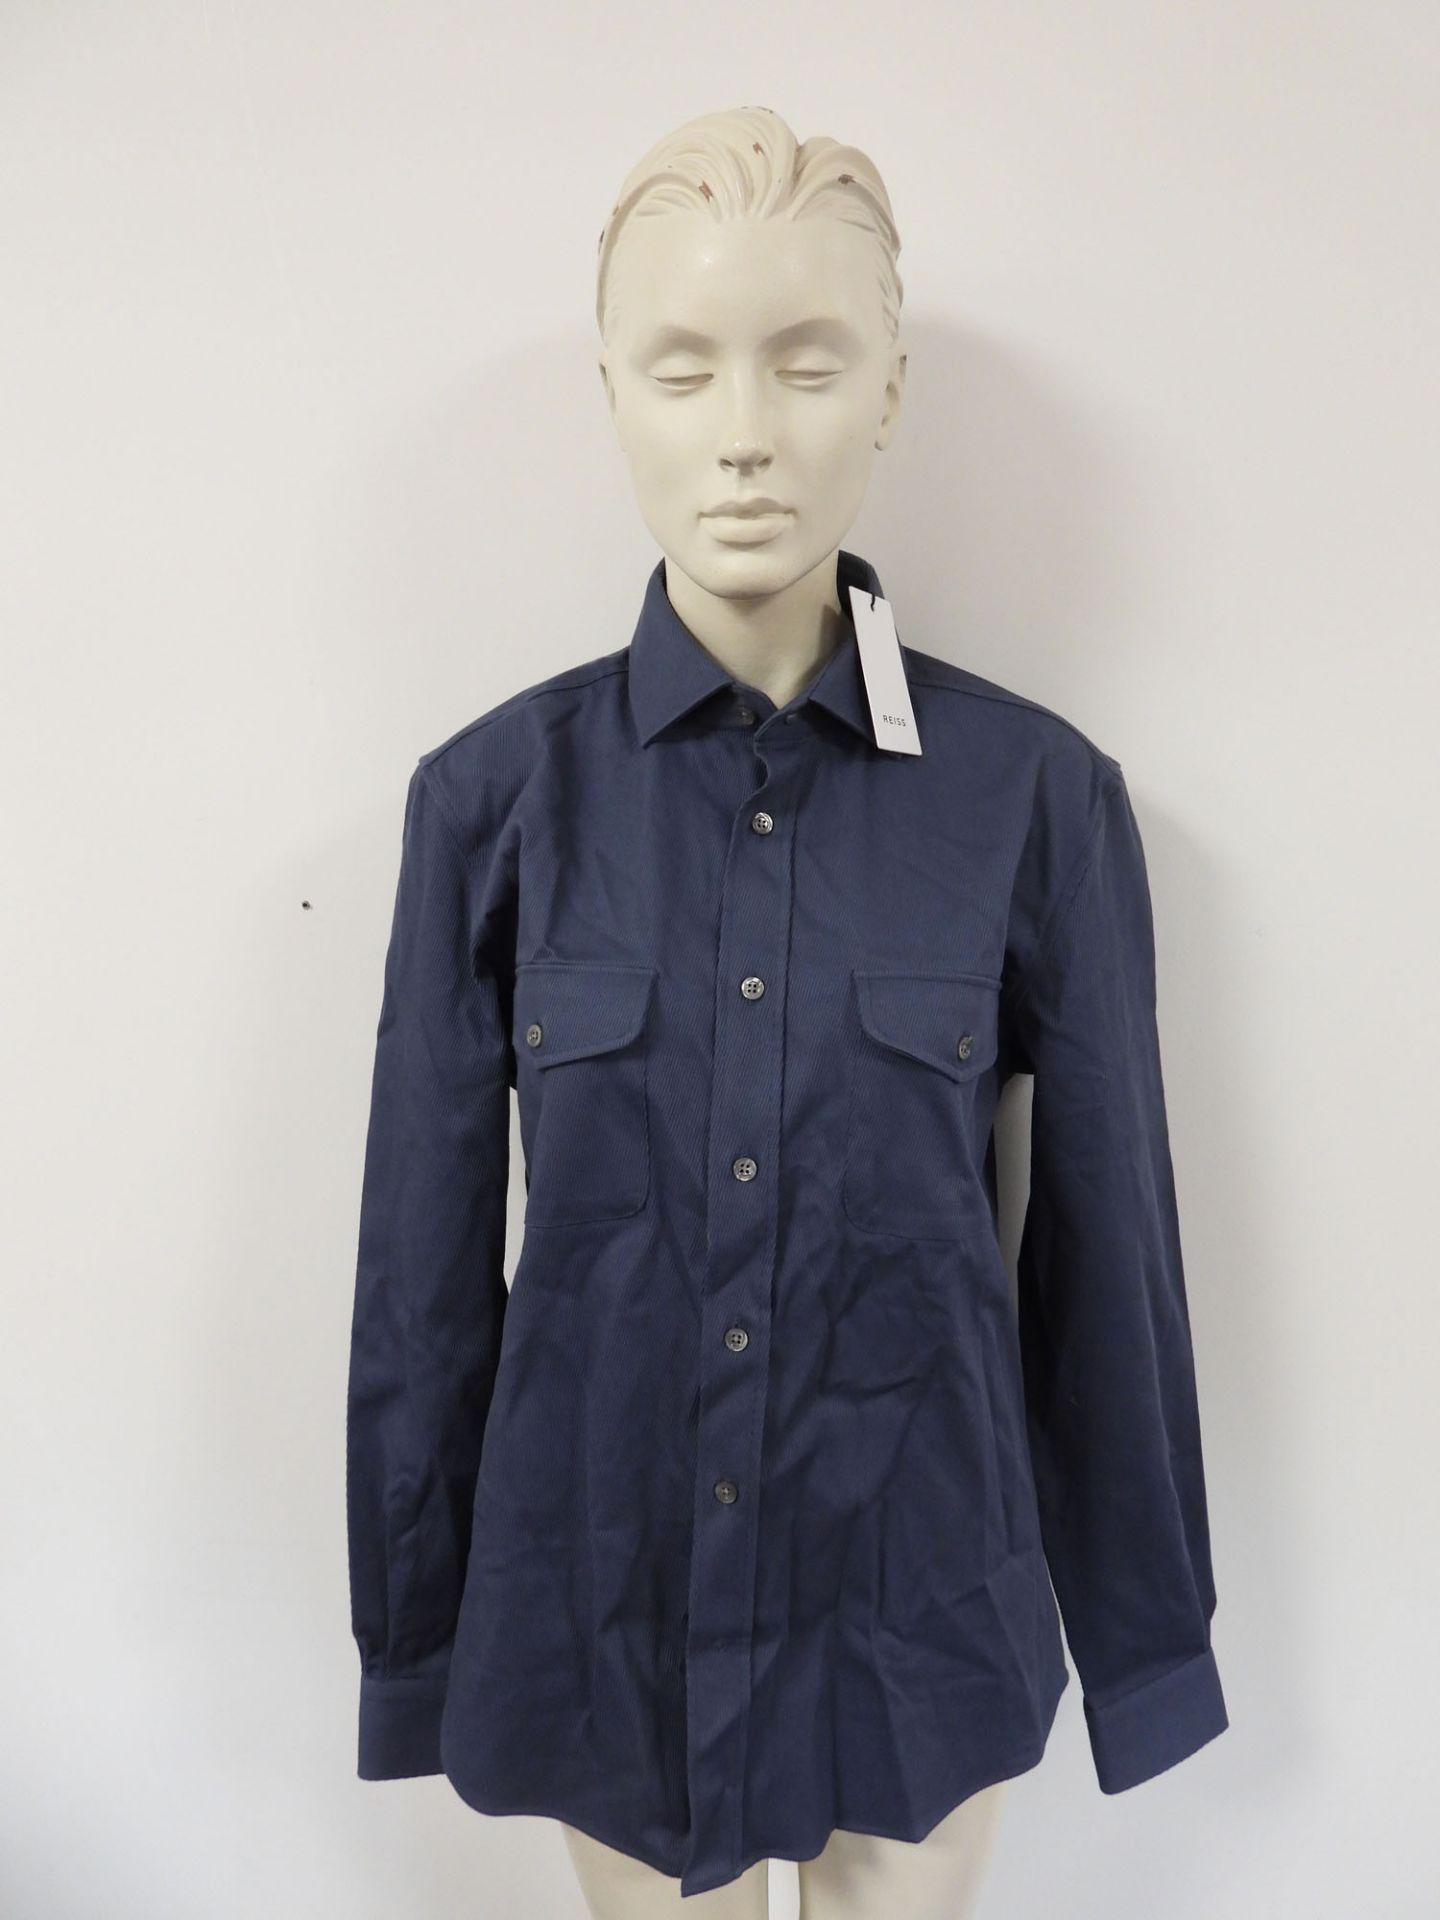 Reiss heavy twill overshirt in air force blue, size medium